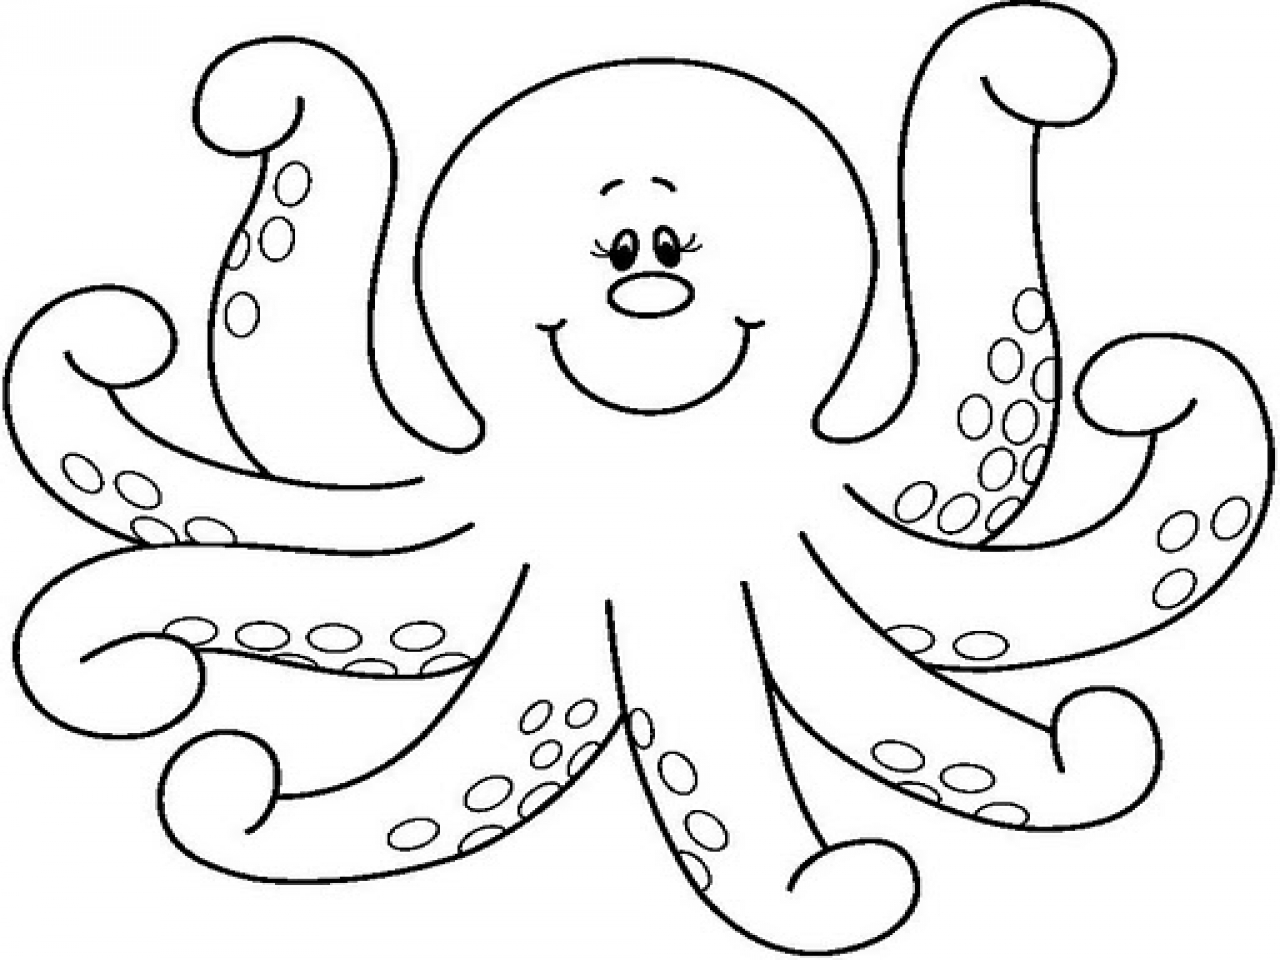 Octopus clip art black and white